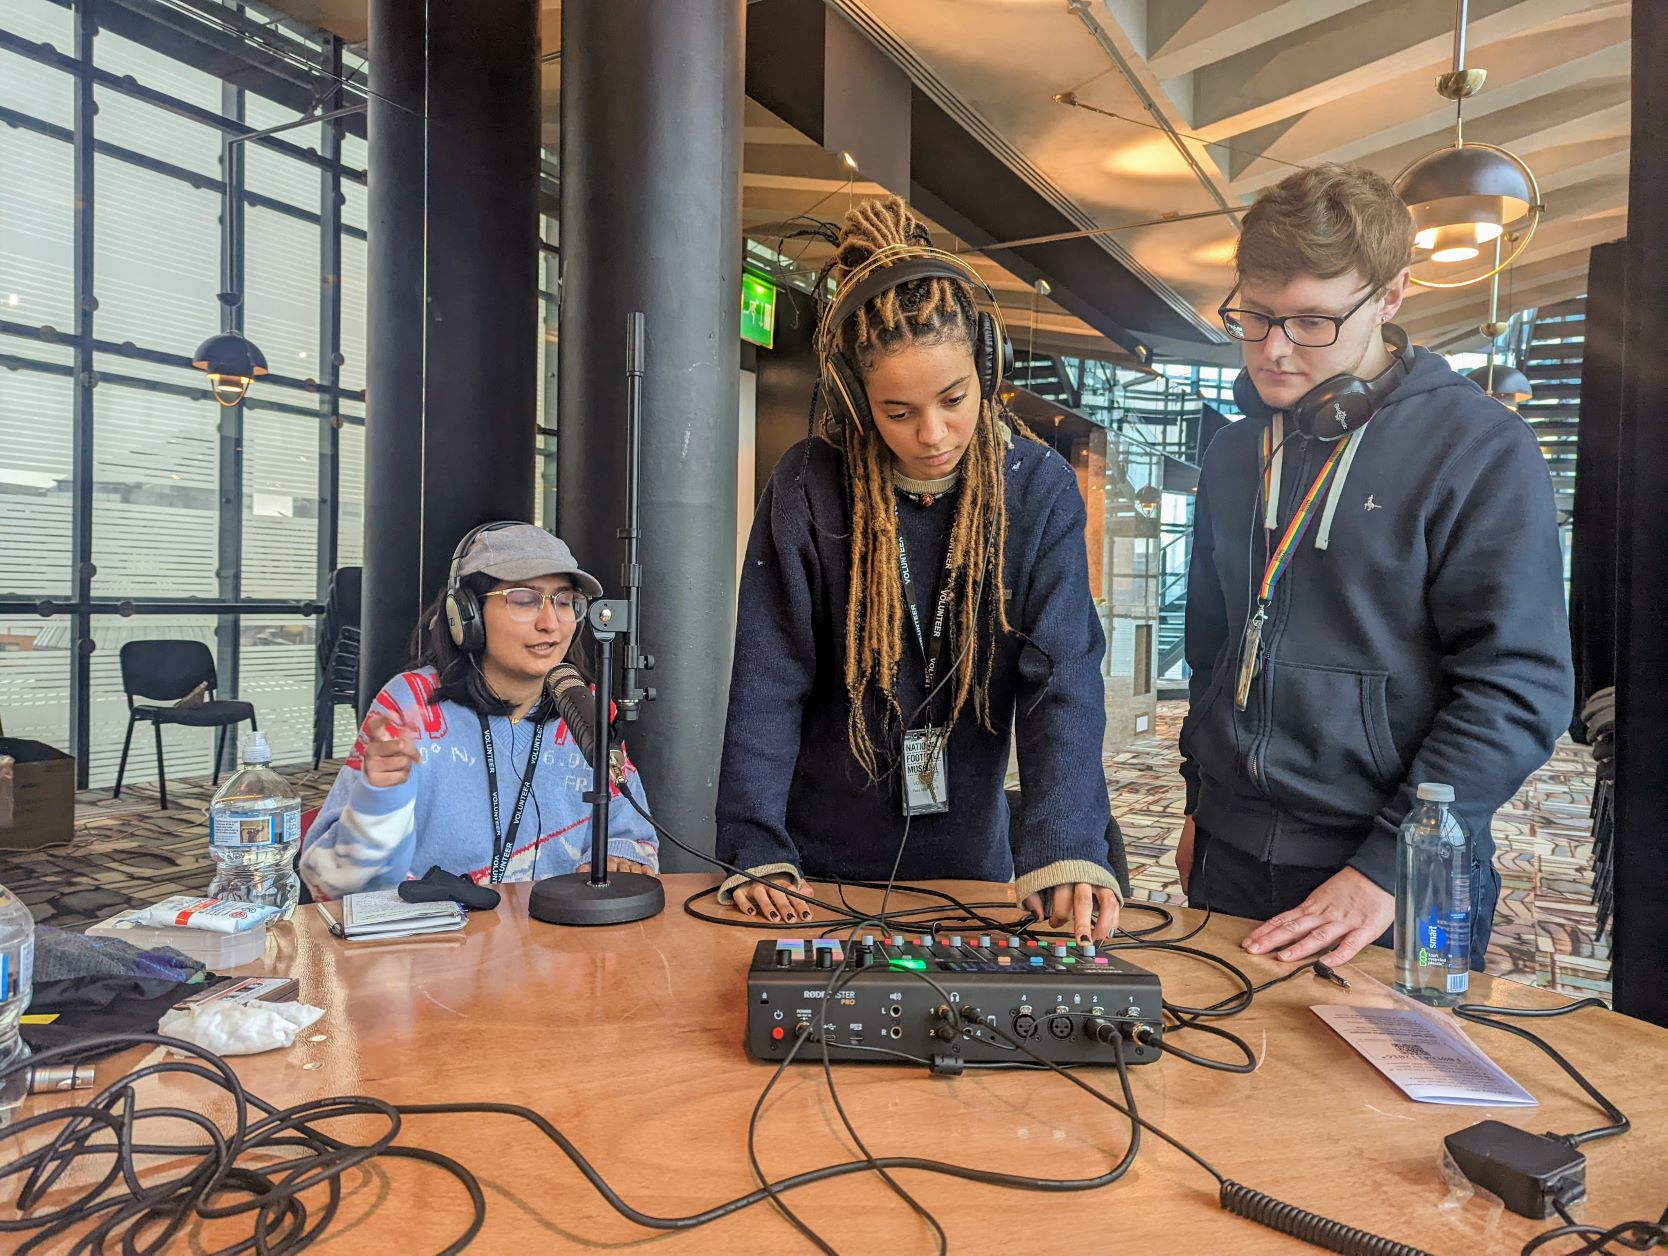 3 people around a table. 1 girl seated with headphones on. A male and young girl stand looking over a sound desk. The record the national football museum podcast